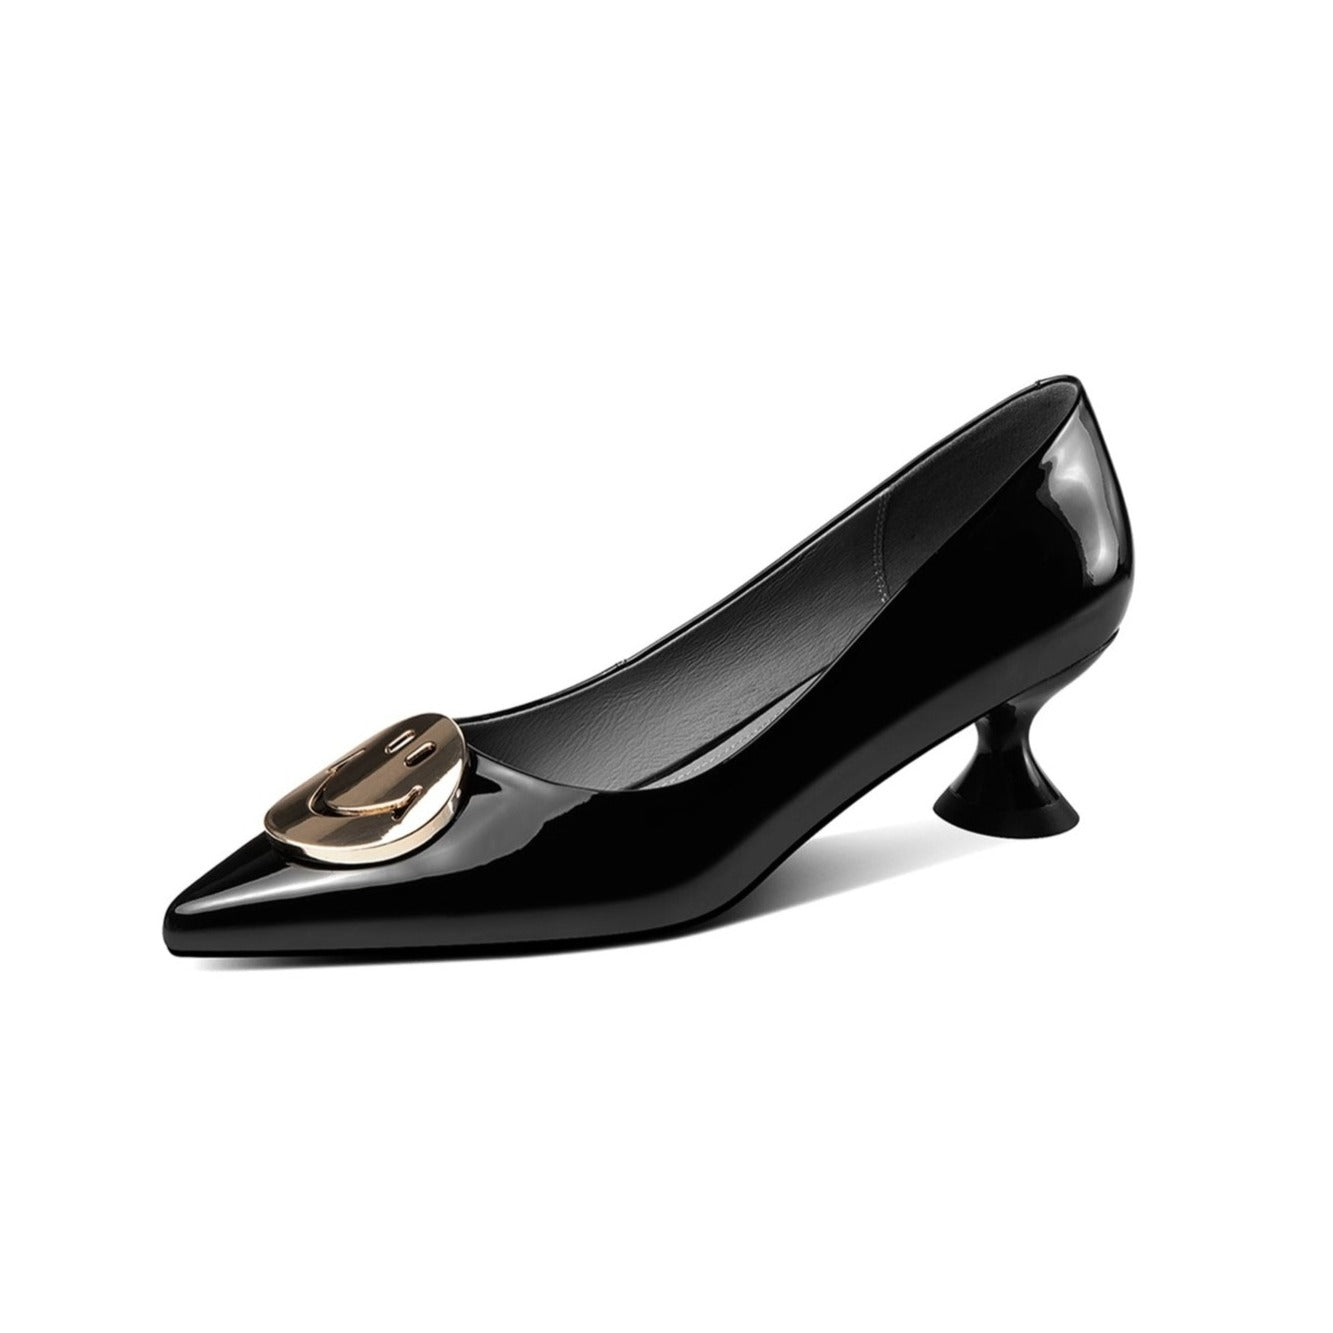 TinaCus Glossy Patent Leather Women's Handmade Pointed Toe Loafer Pumps with Cute Smile Pattern